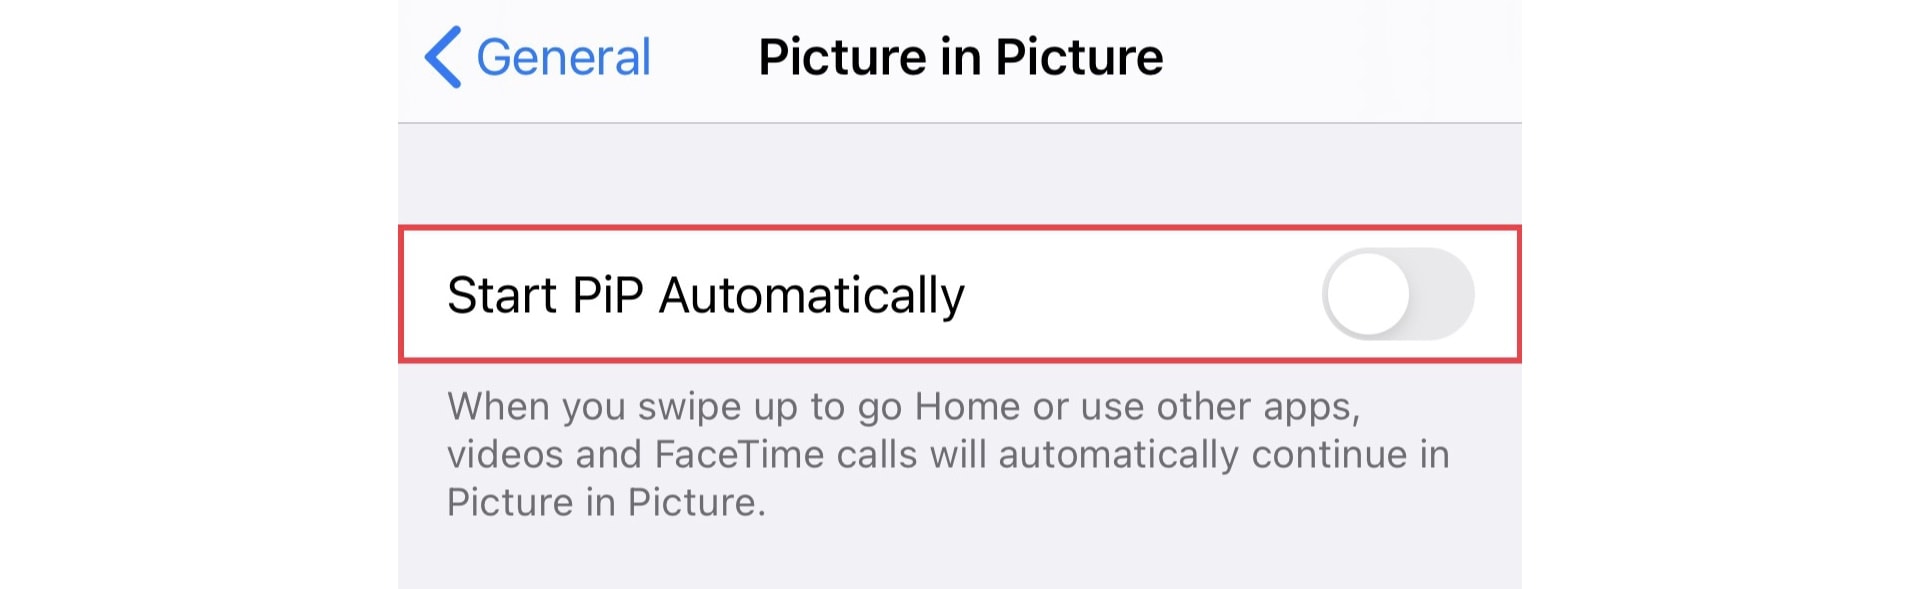 How to disable automatic picture-in-picture